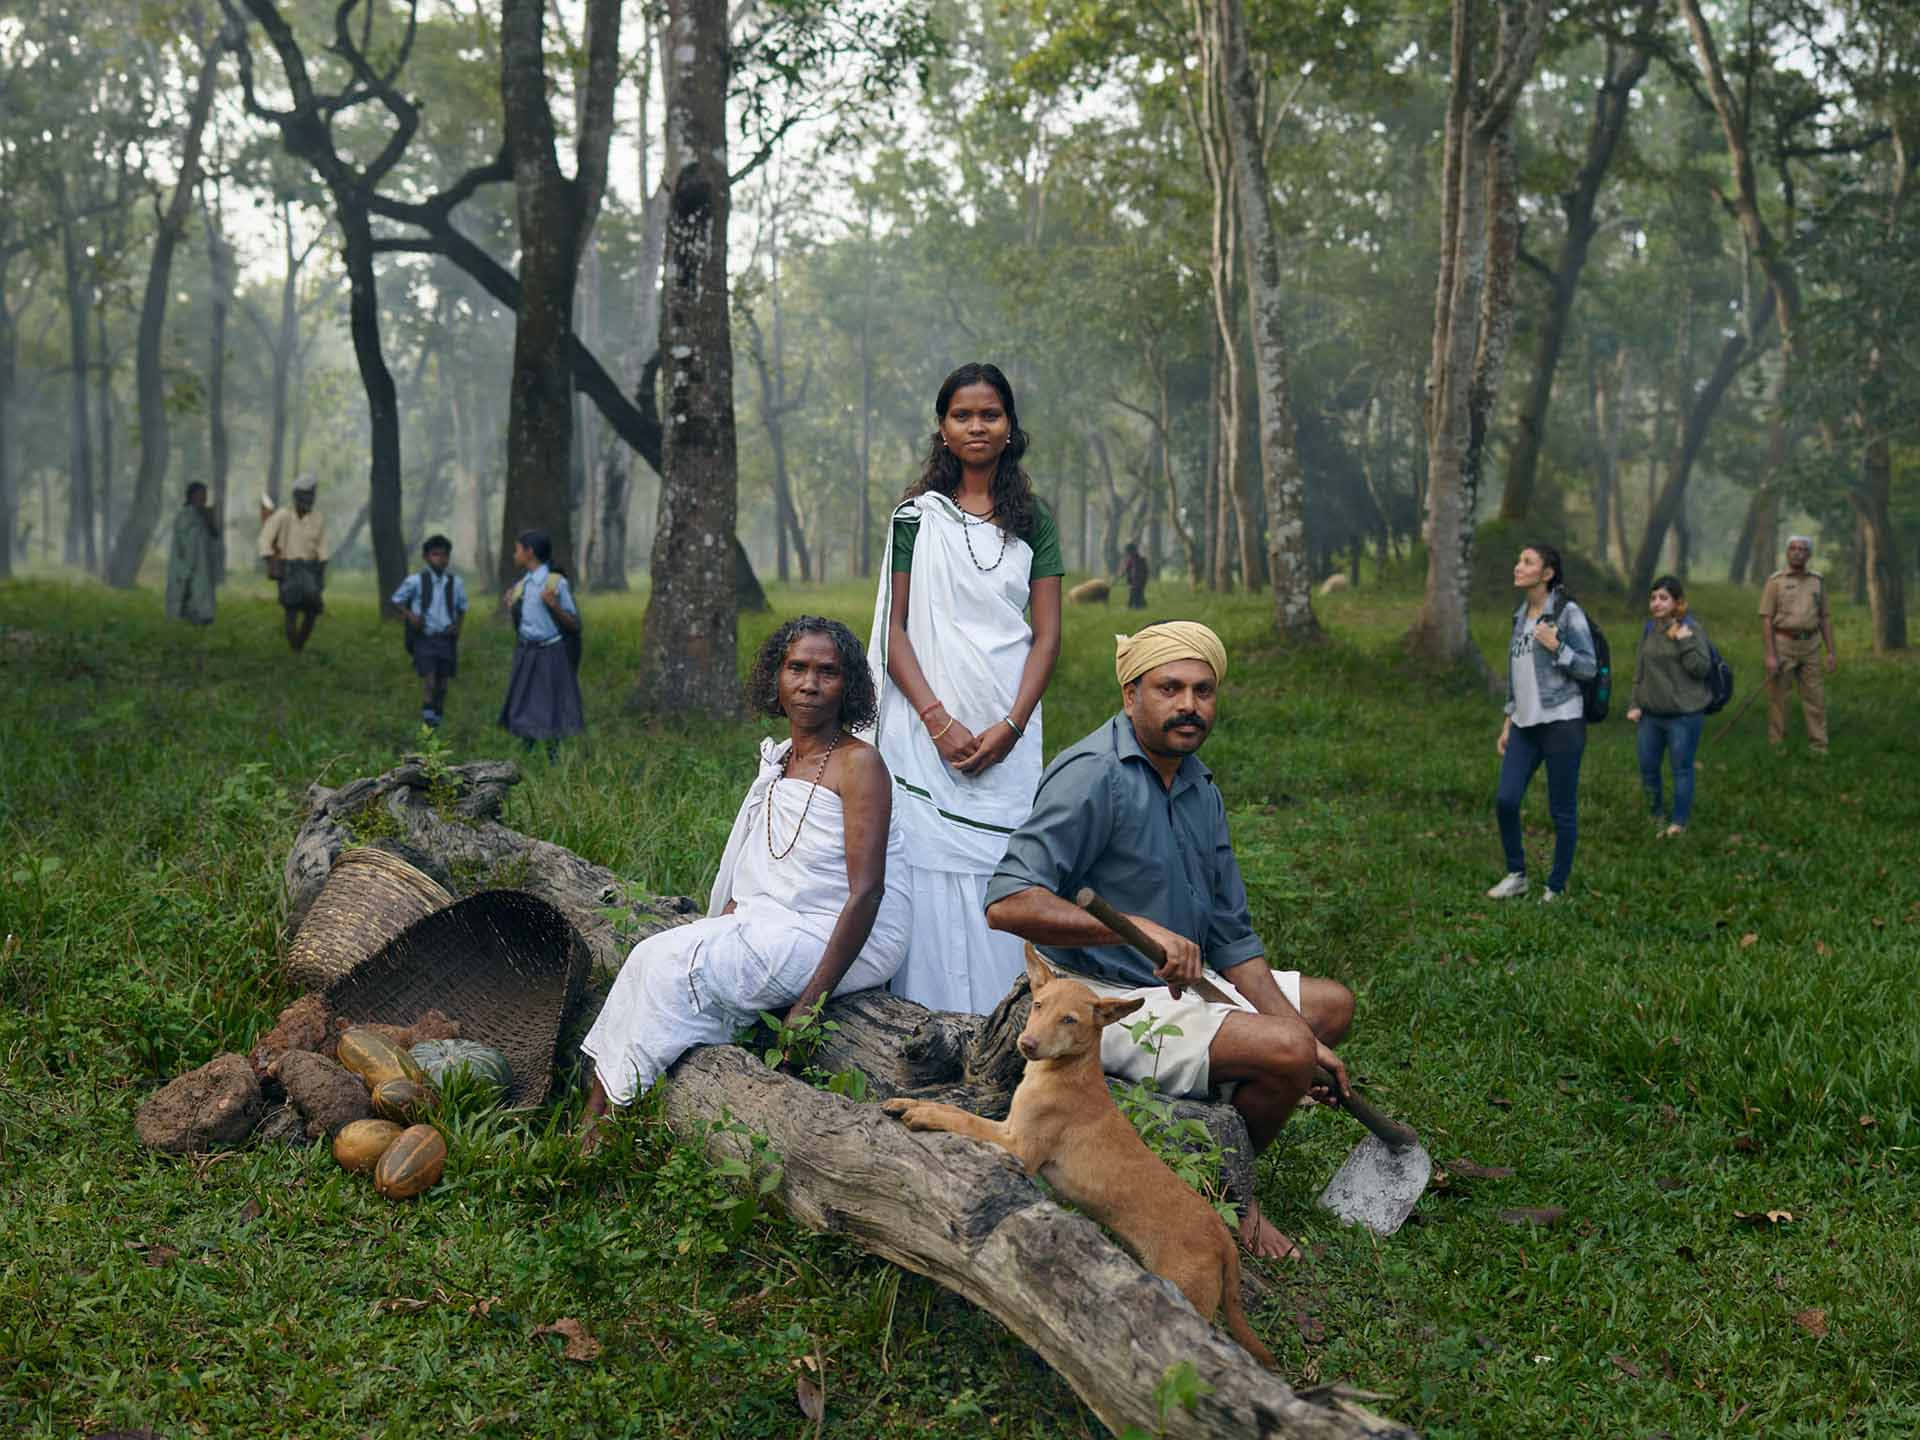 A Family Sits On A Log In The Forest